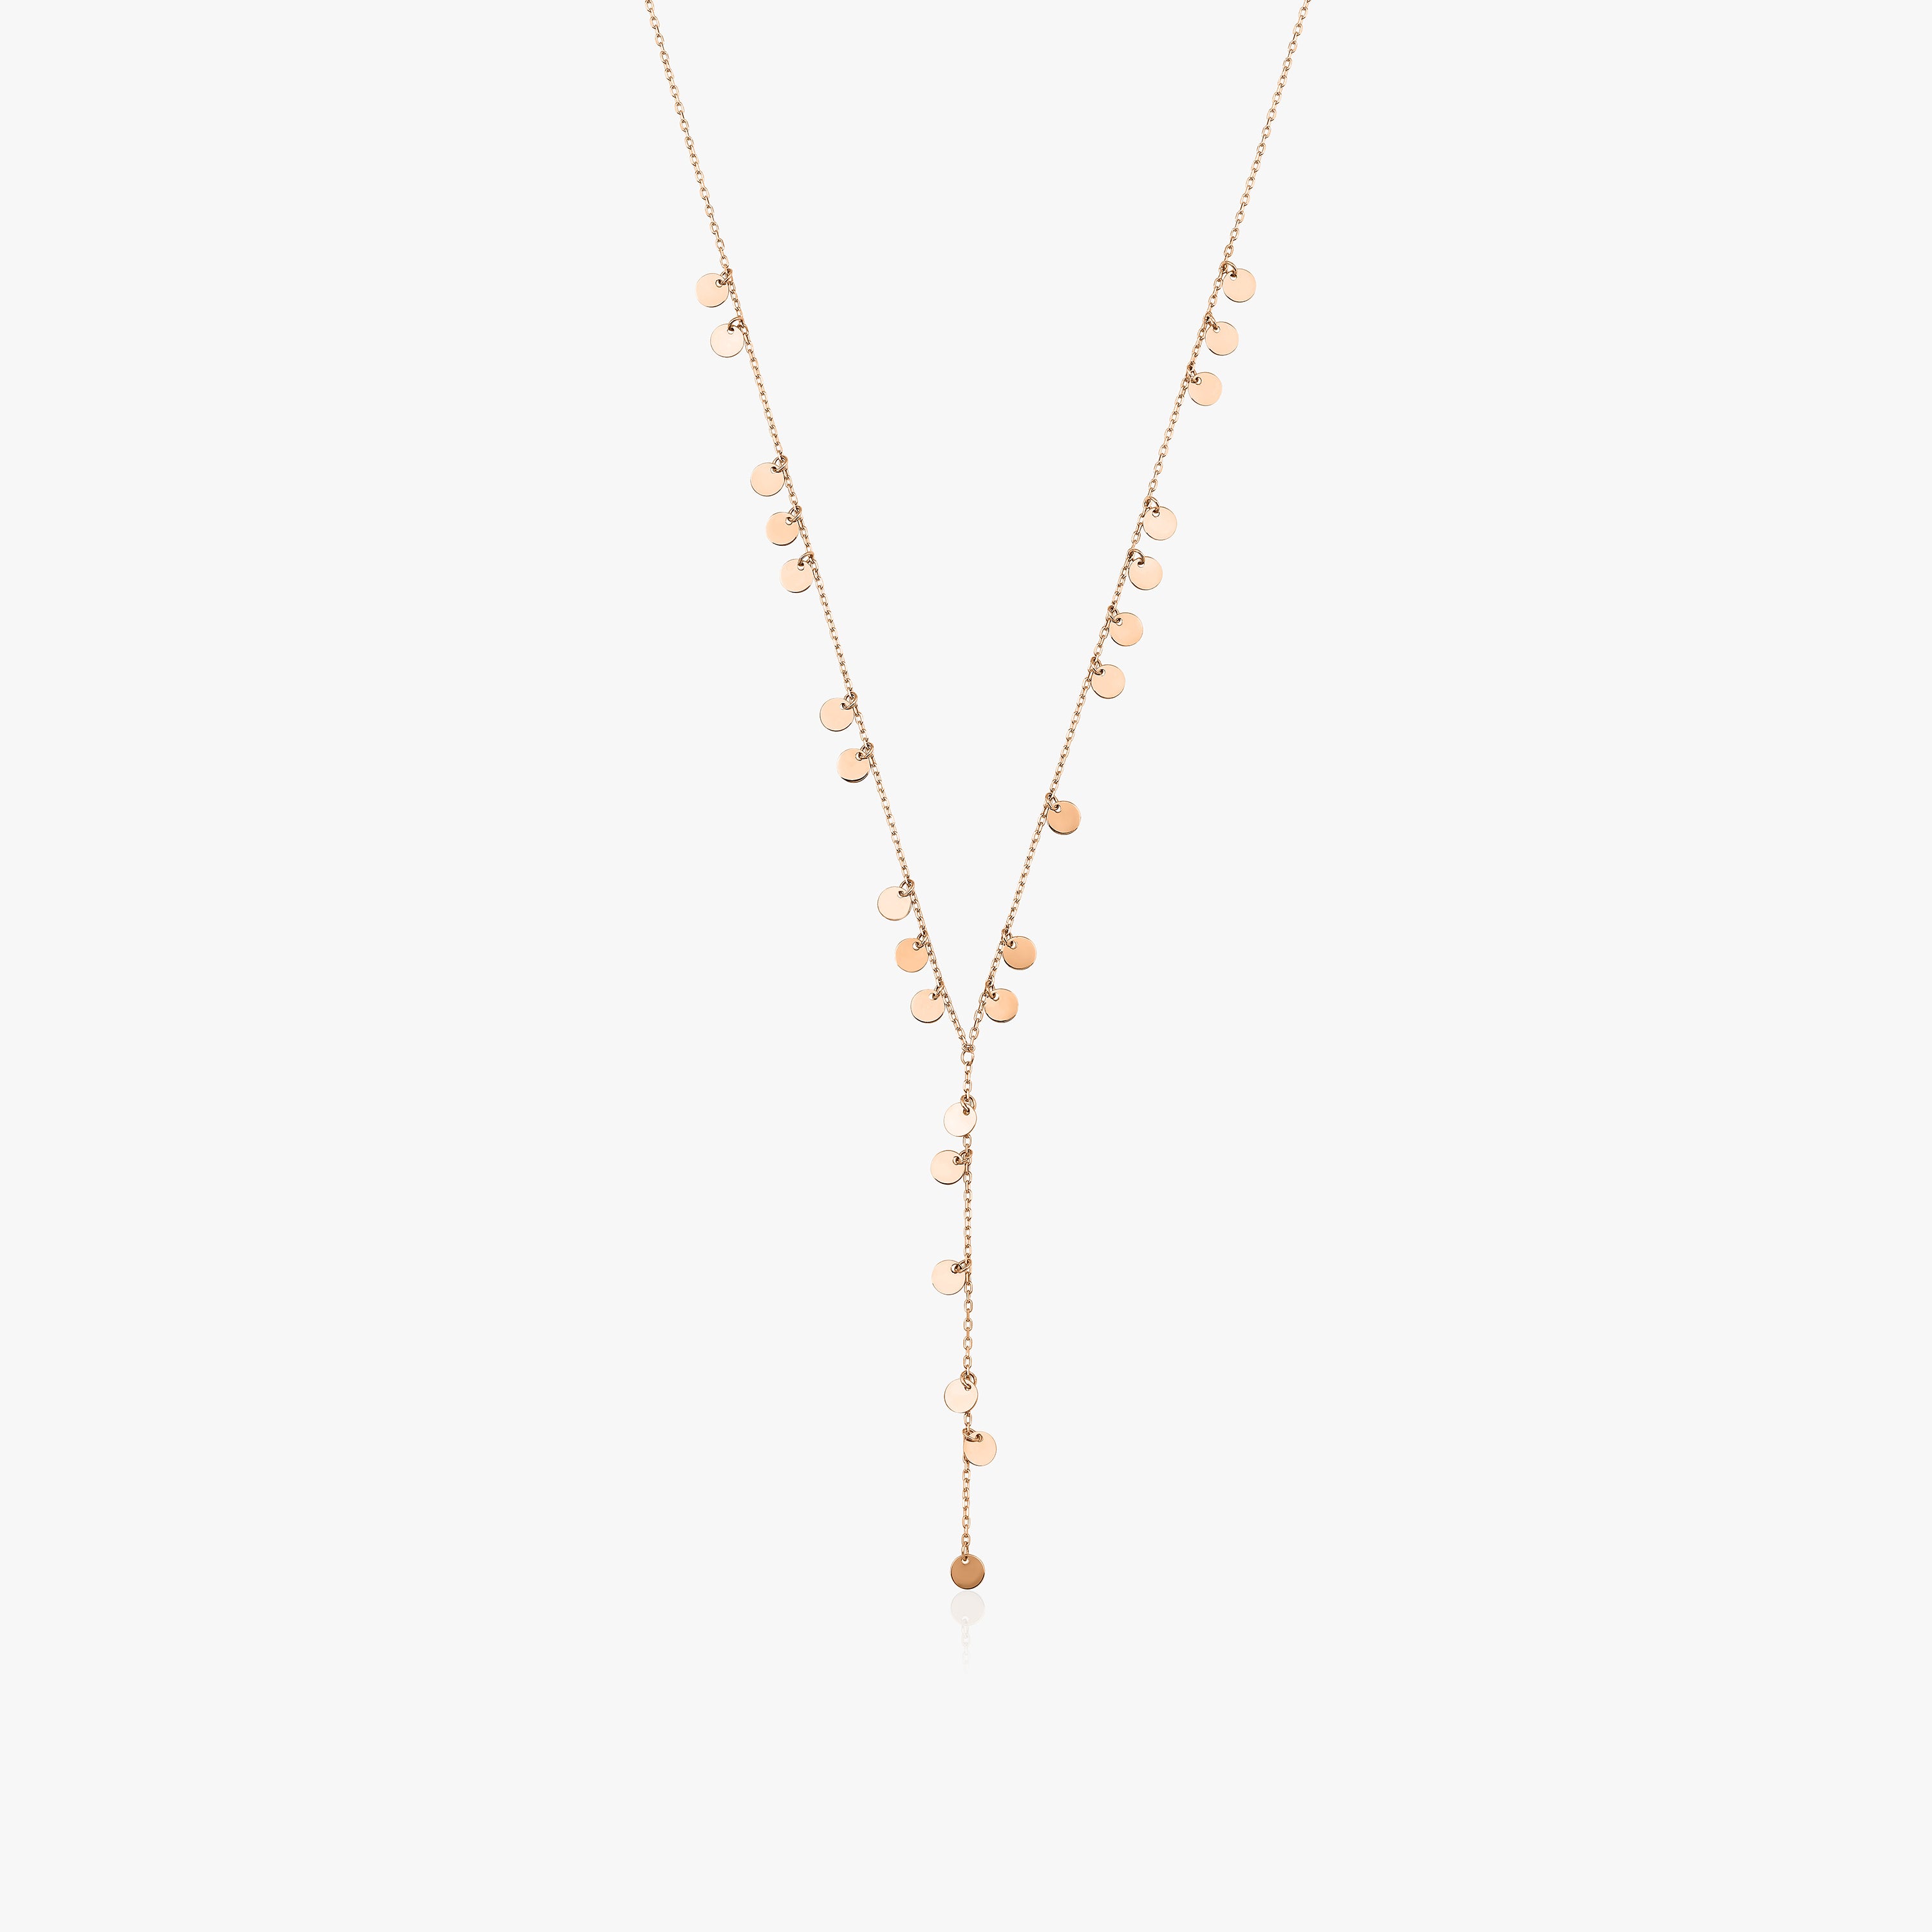 Dangle Disc Lariat Necklace in 14K Gold